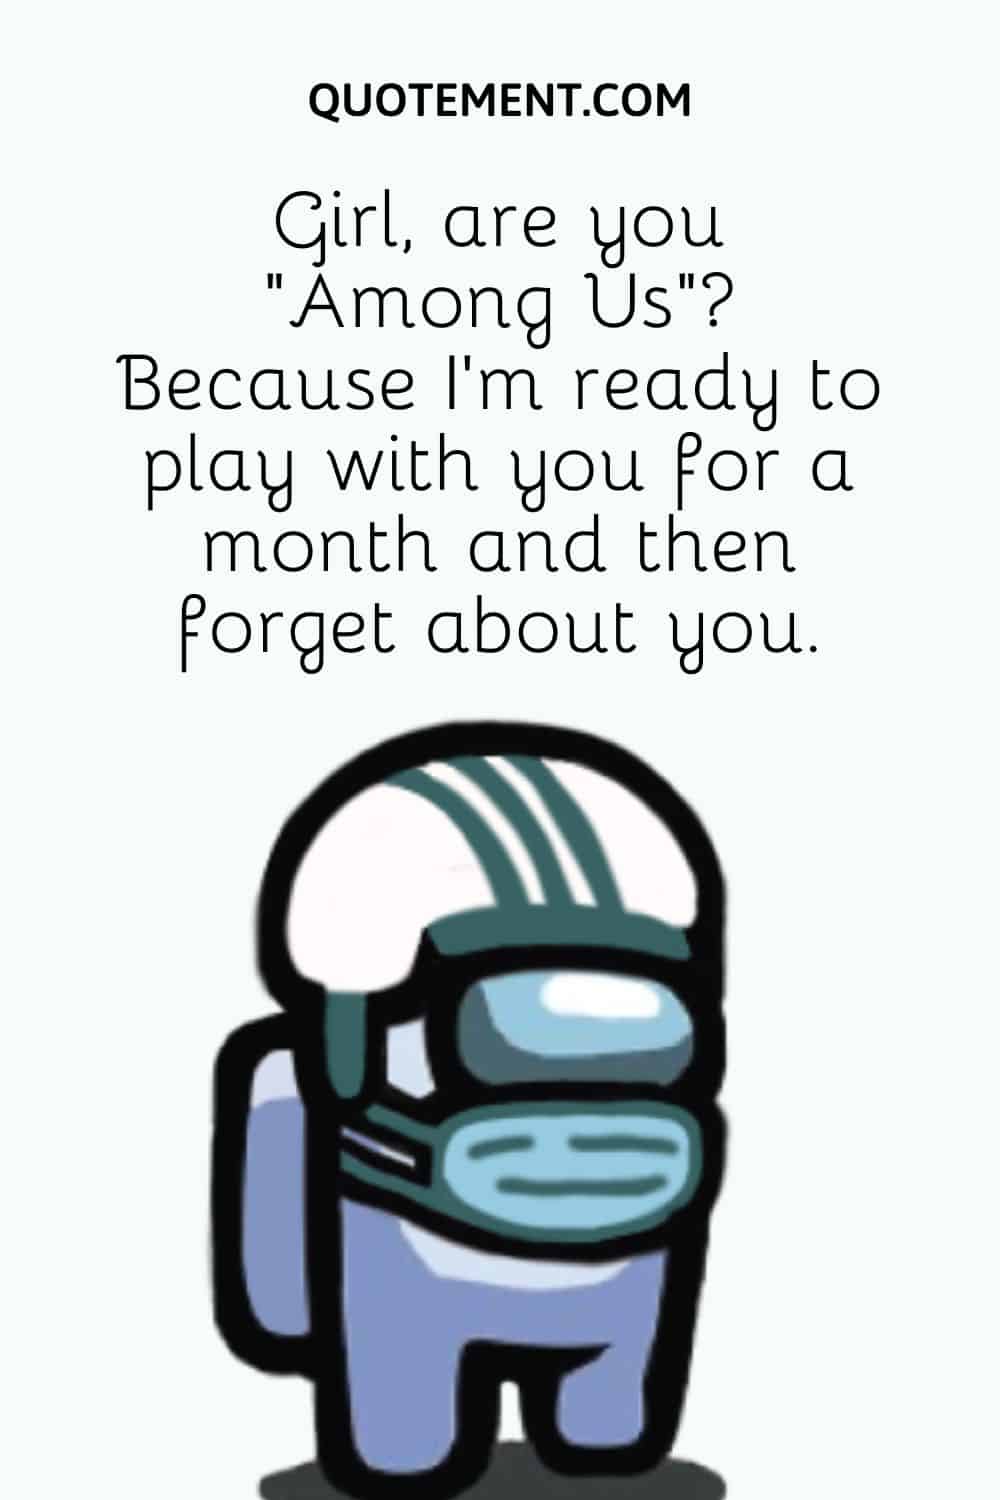 Girl, are you “Among Us” Because I’m ready to play with you for a month and then forget about you.